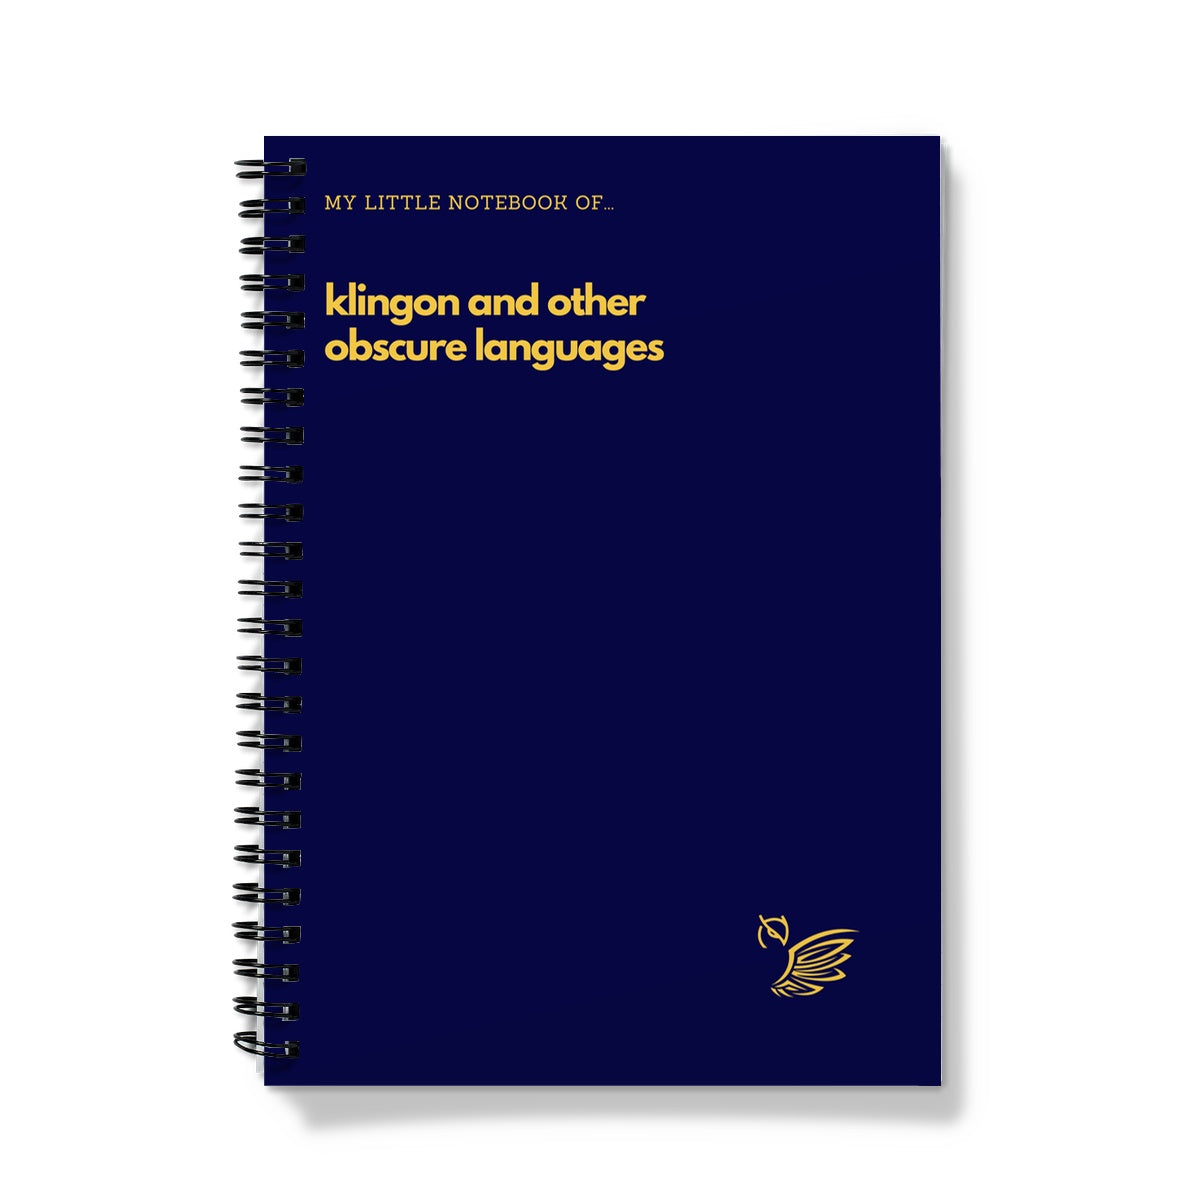 klingon and other obscure languages notebook